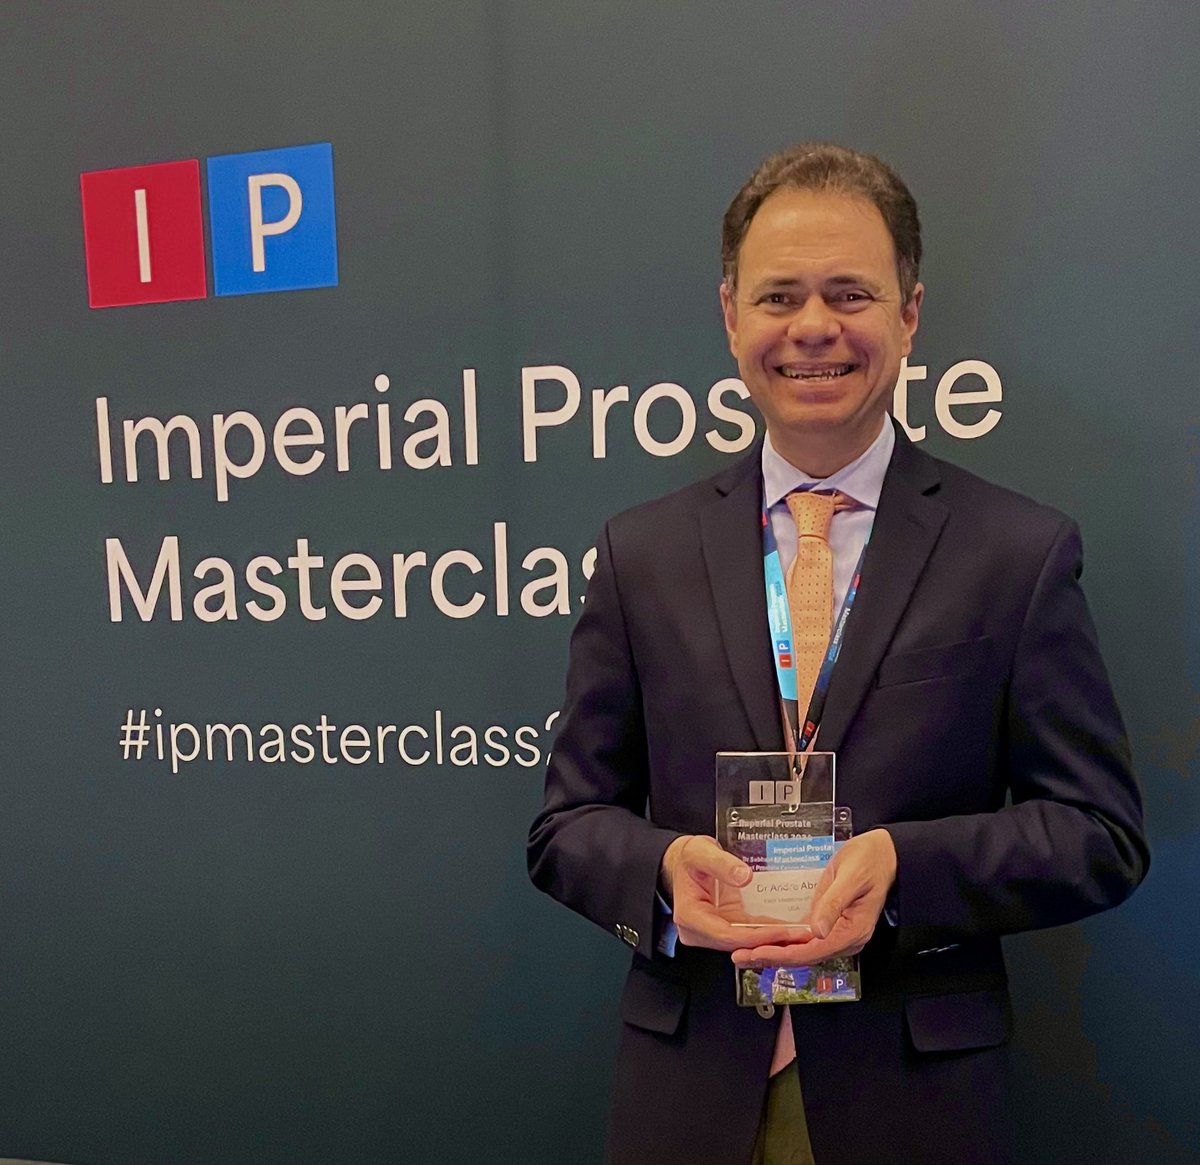 Really appreciate @IP_London for warmly welcome at the outstanding #ipmasterclass24 and for this honorable Award that I share with the research team. I also thank the patients for participating in research Thank you @alirezaghoreifi @KanekoMasatomo @lorenzormc @USC_Urology